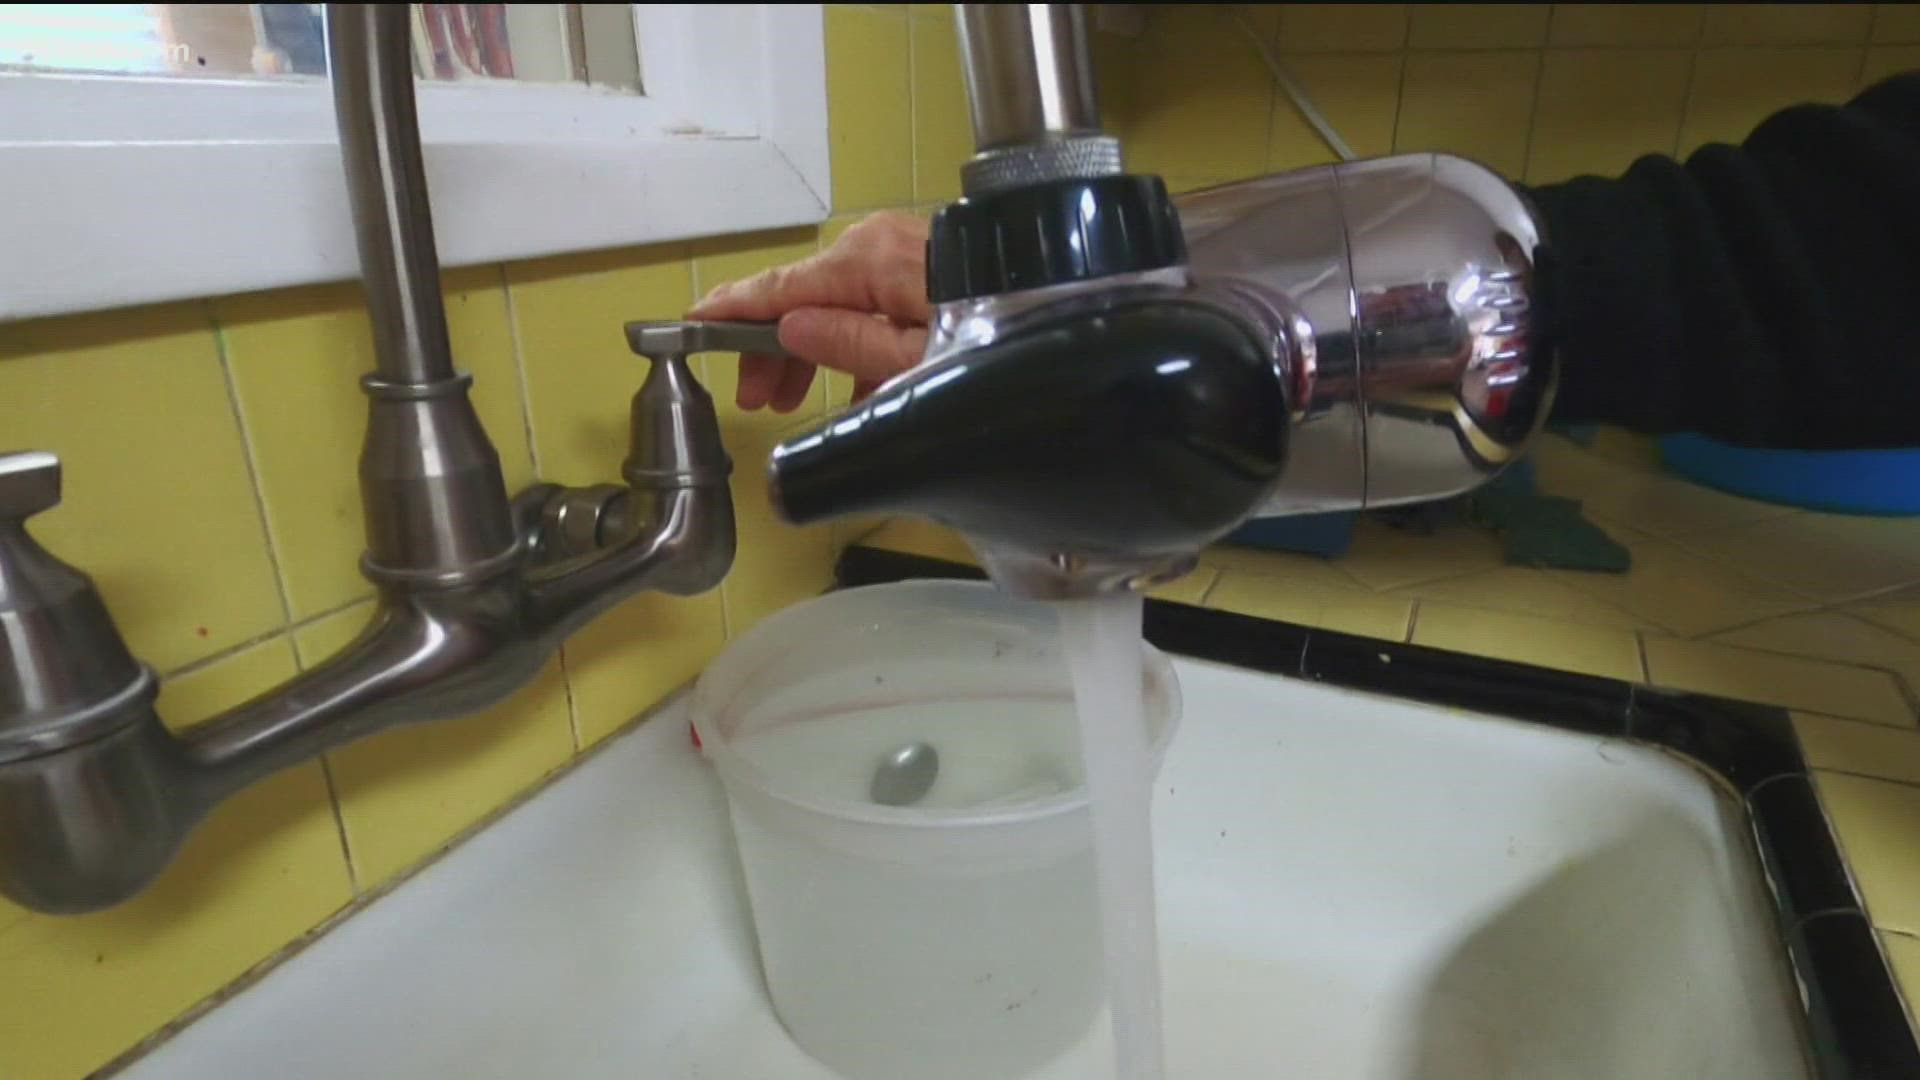 California regulators are launching their most health-protective program ever to test drinking water for lead in licensed child care facilities.